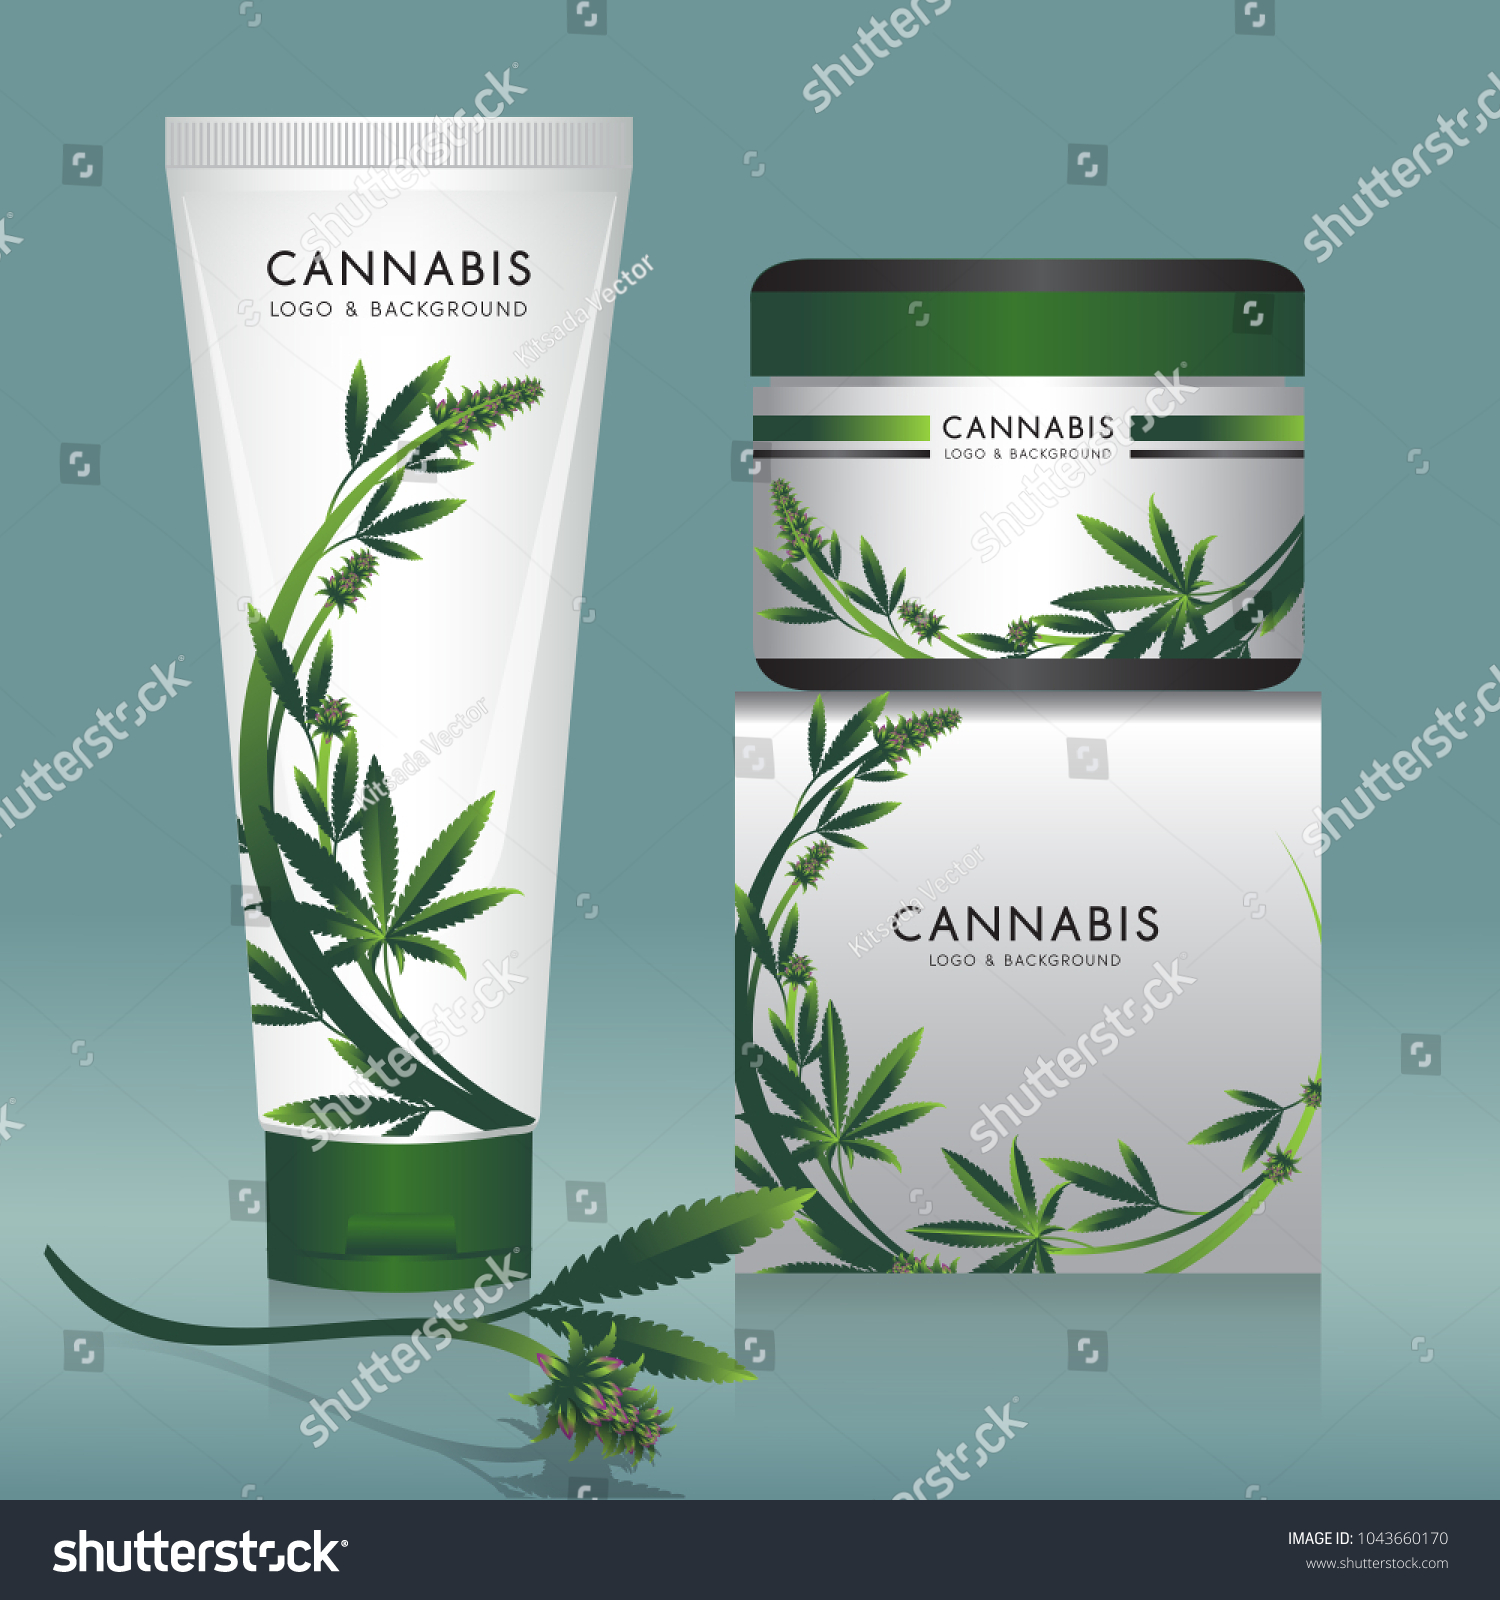 Cannabis marijuana Packaging product label and logo graphic template #1043660170